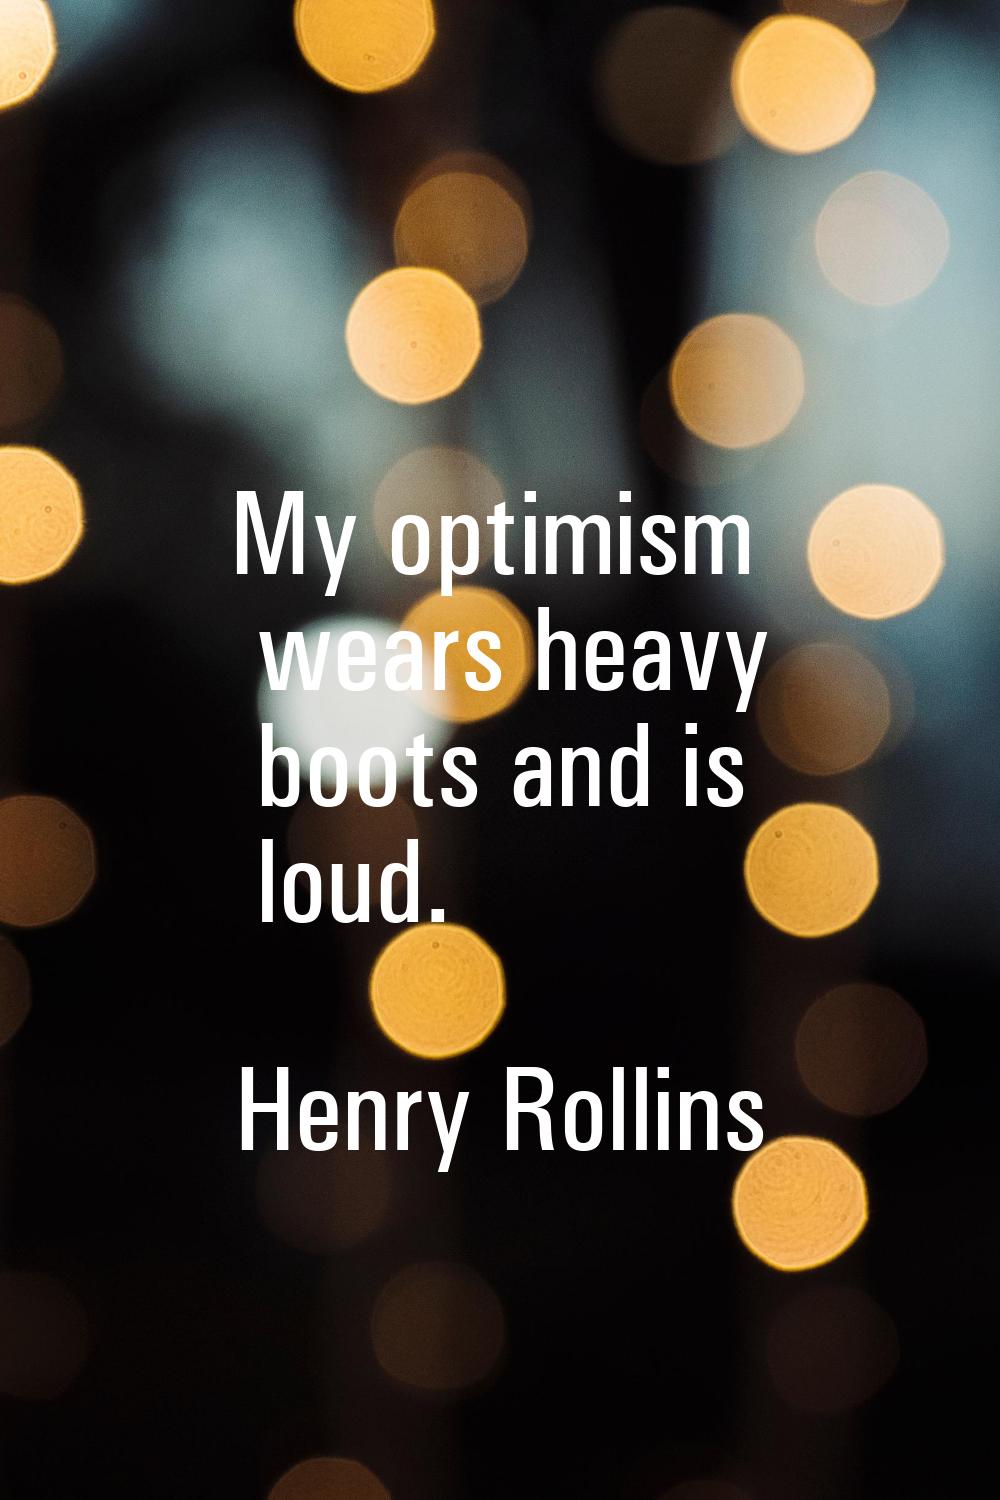 My optimism wears heavy boots and is loud.